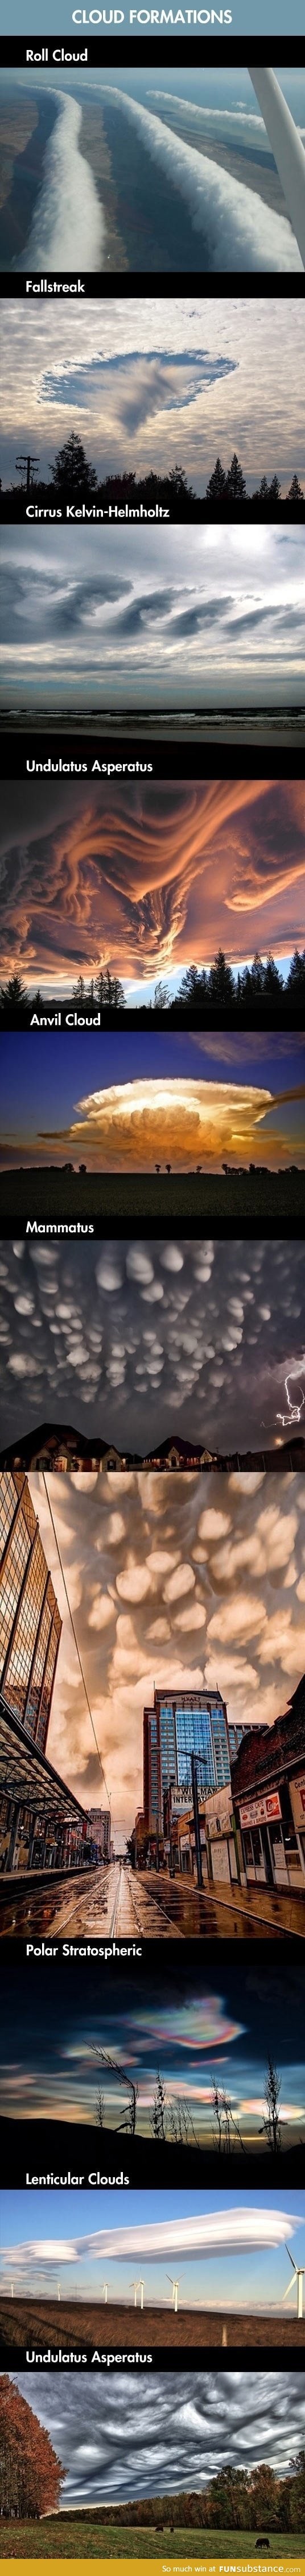 Incredible cloud formations